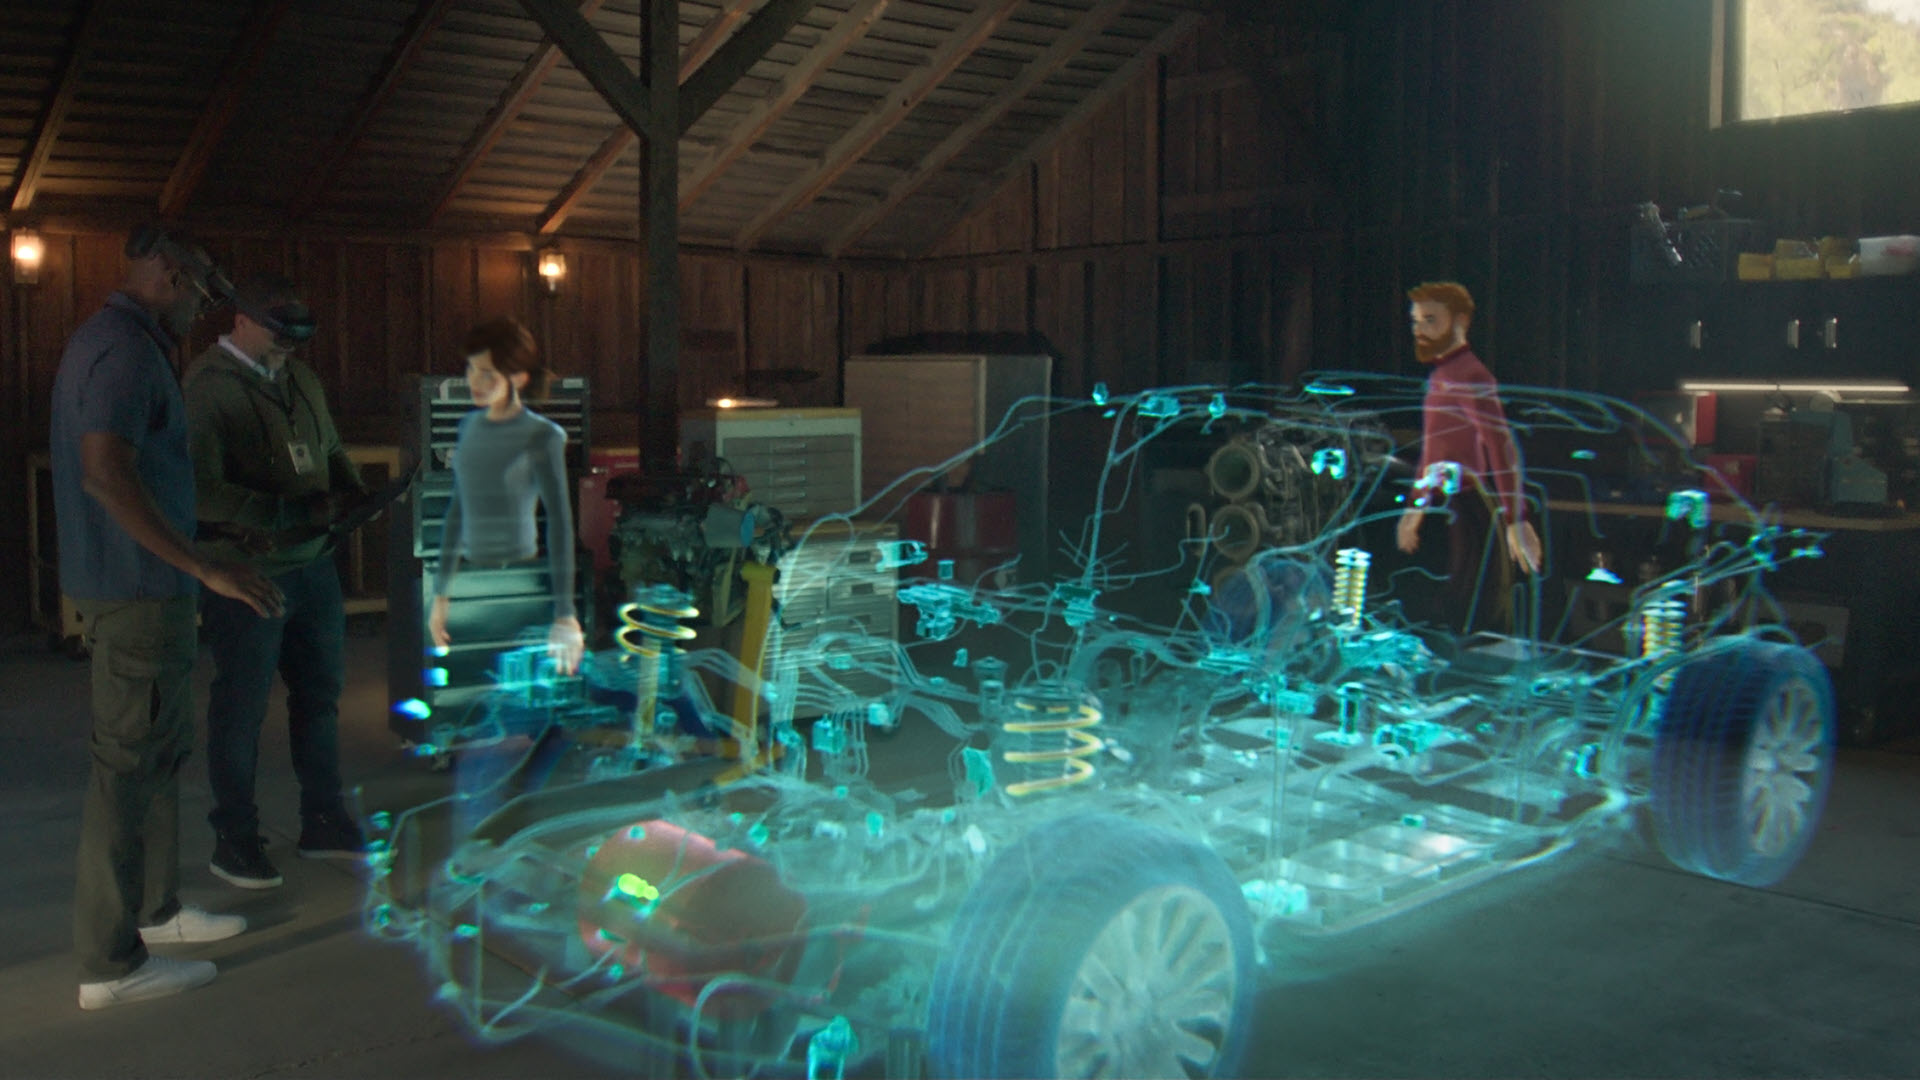 Avatars appear around a three-dimensional hologram of car schematics to illustrate a virtual design review session in mixed reality.